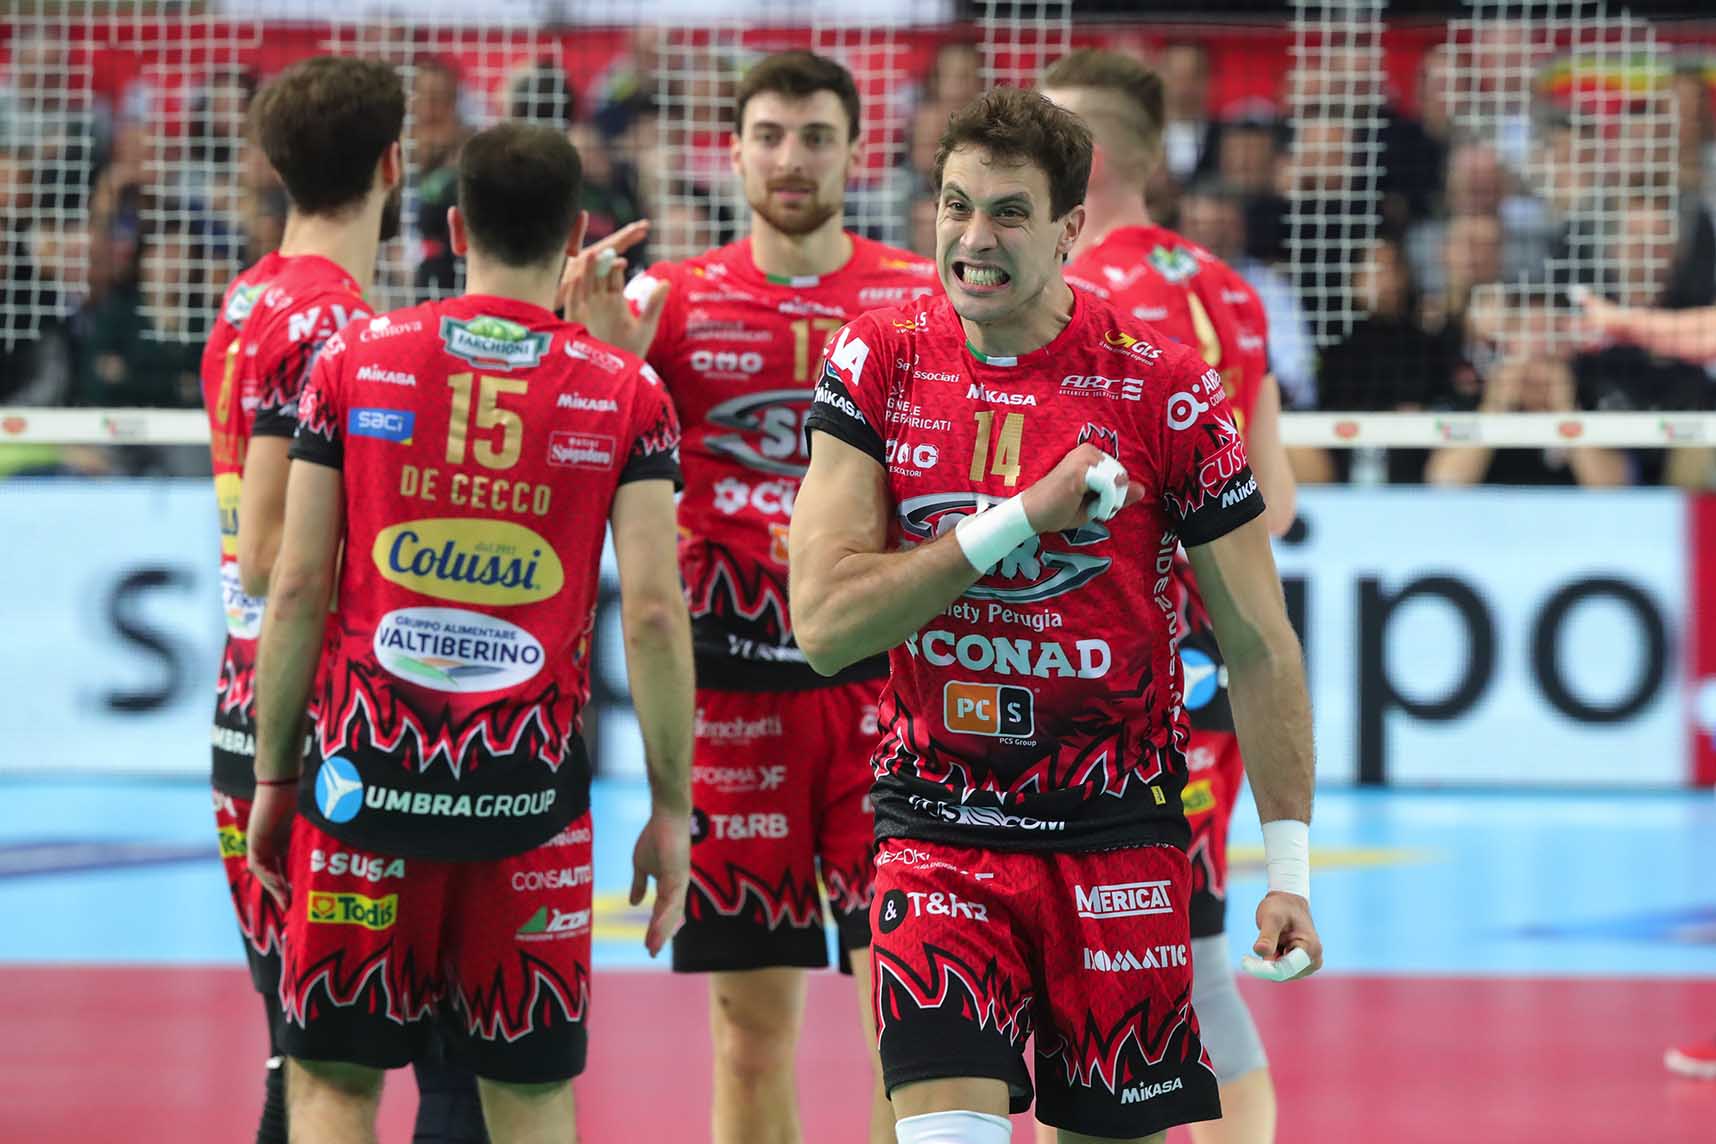 MIKASA SHIRT VOLLEYBALL COMPETITION SIR SAFETY PERUGIA CONAD GRIFO HOME AWAY 